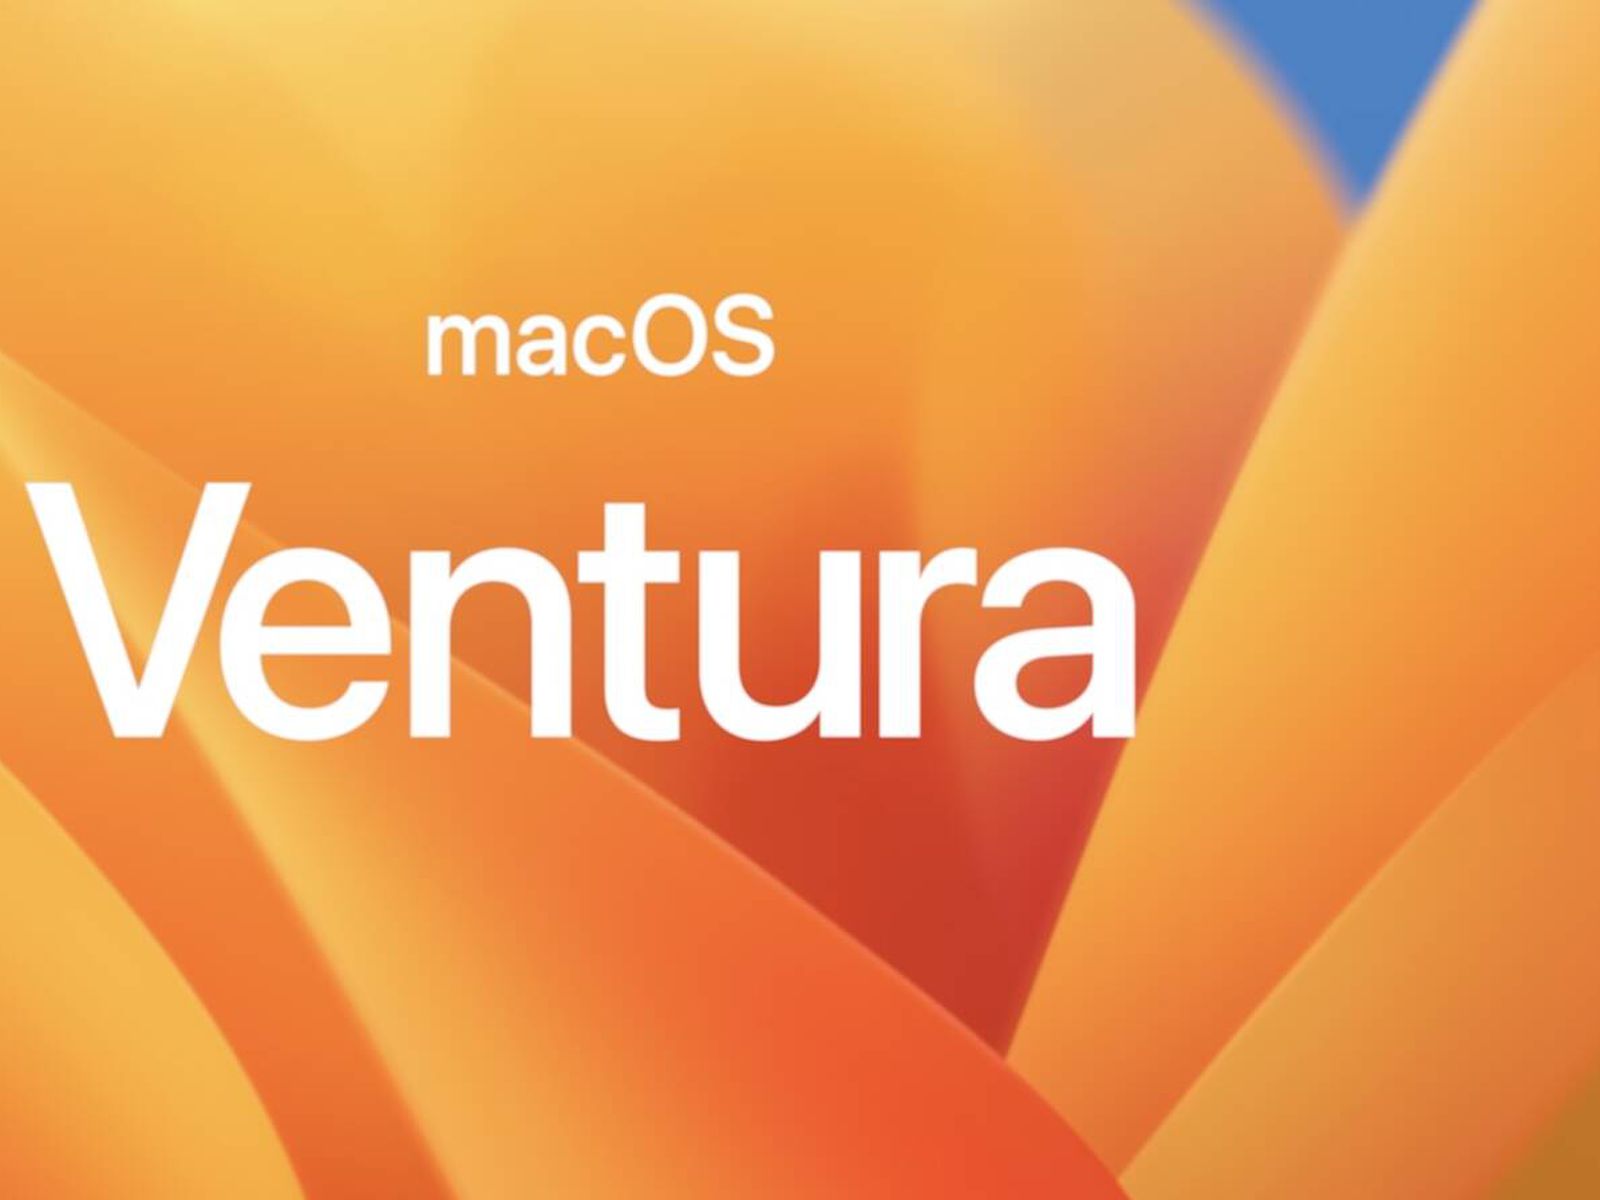 Apple Introduces macOS Ventura: First Look at New Features